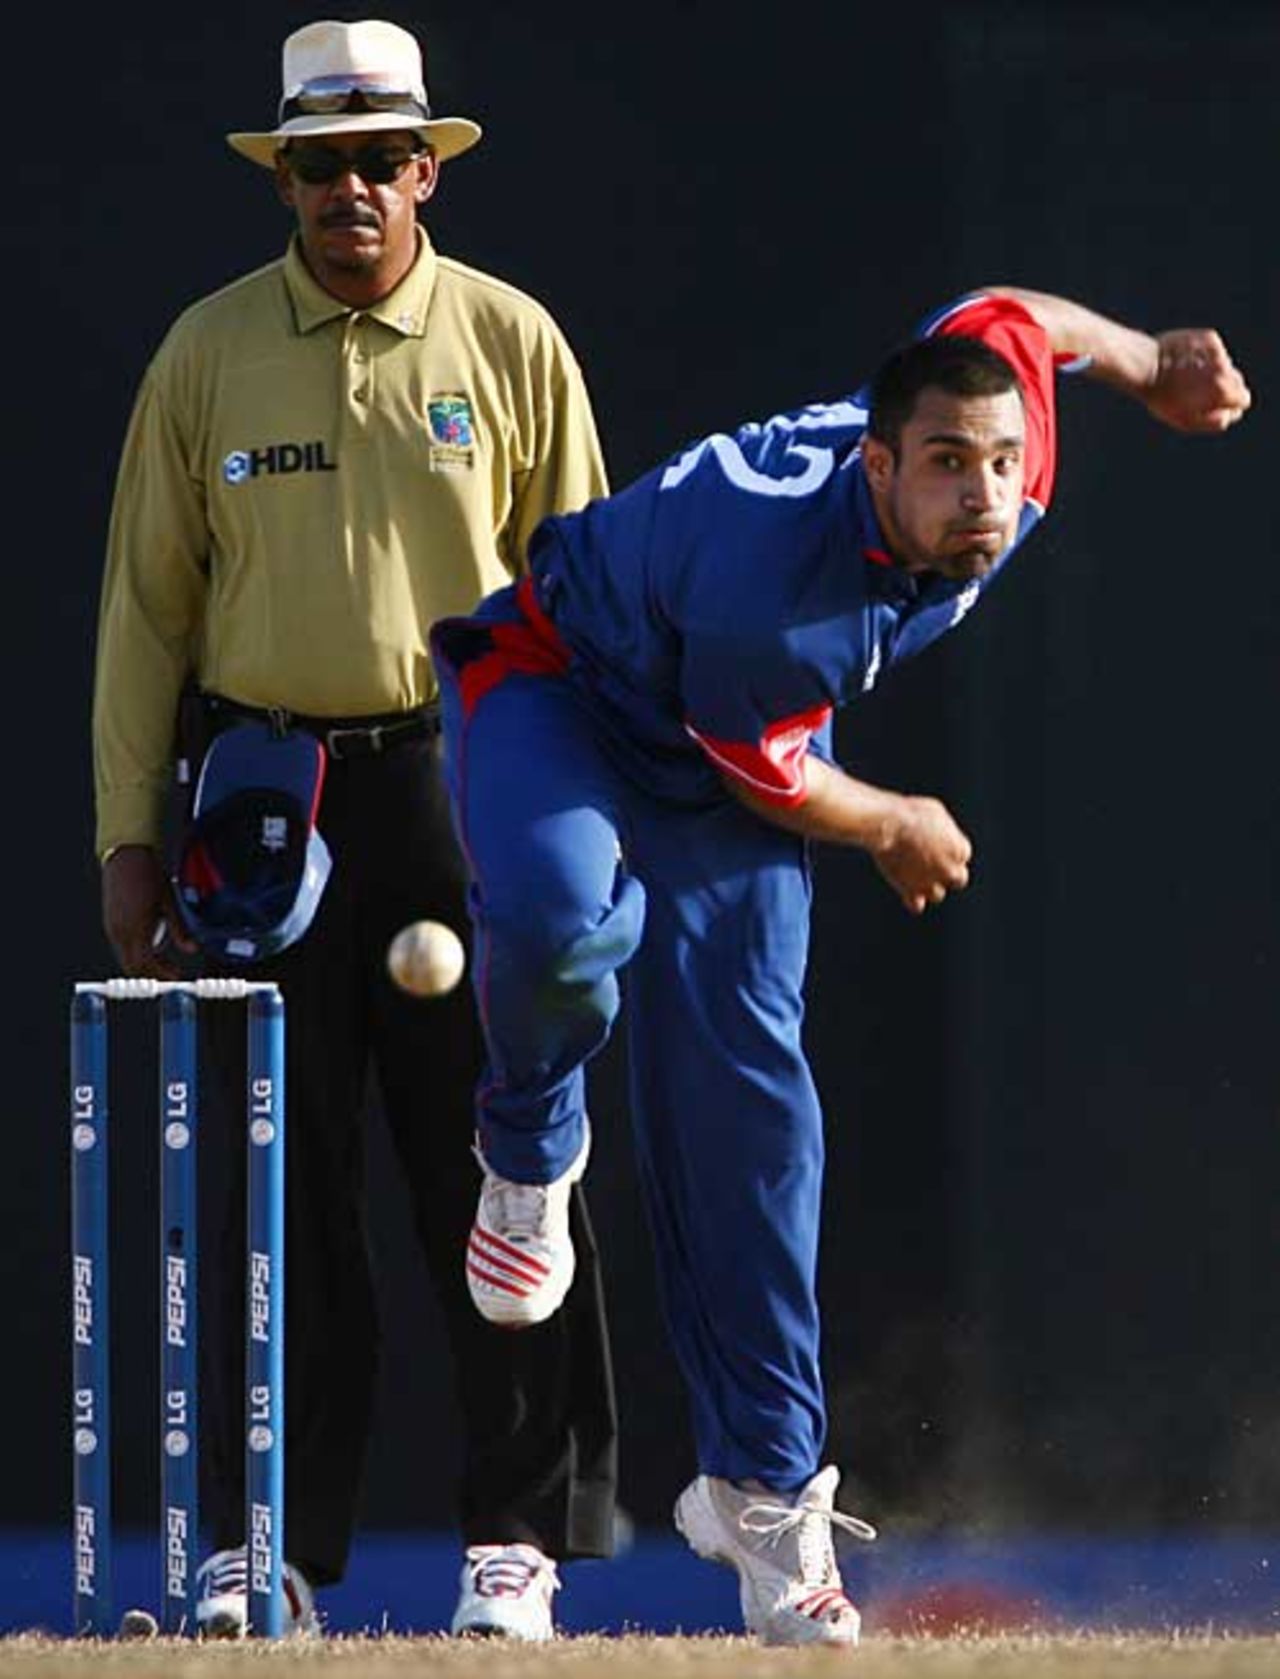 Ravi Bopara enjoyed an impressive World Cup outing with runs and wickets, Canada v England, Group C, St Lucia, March 18, 2007